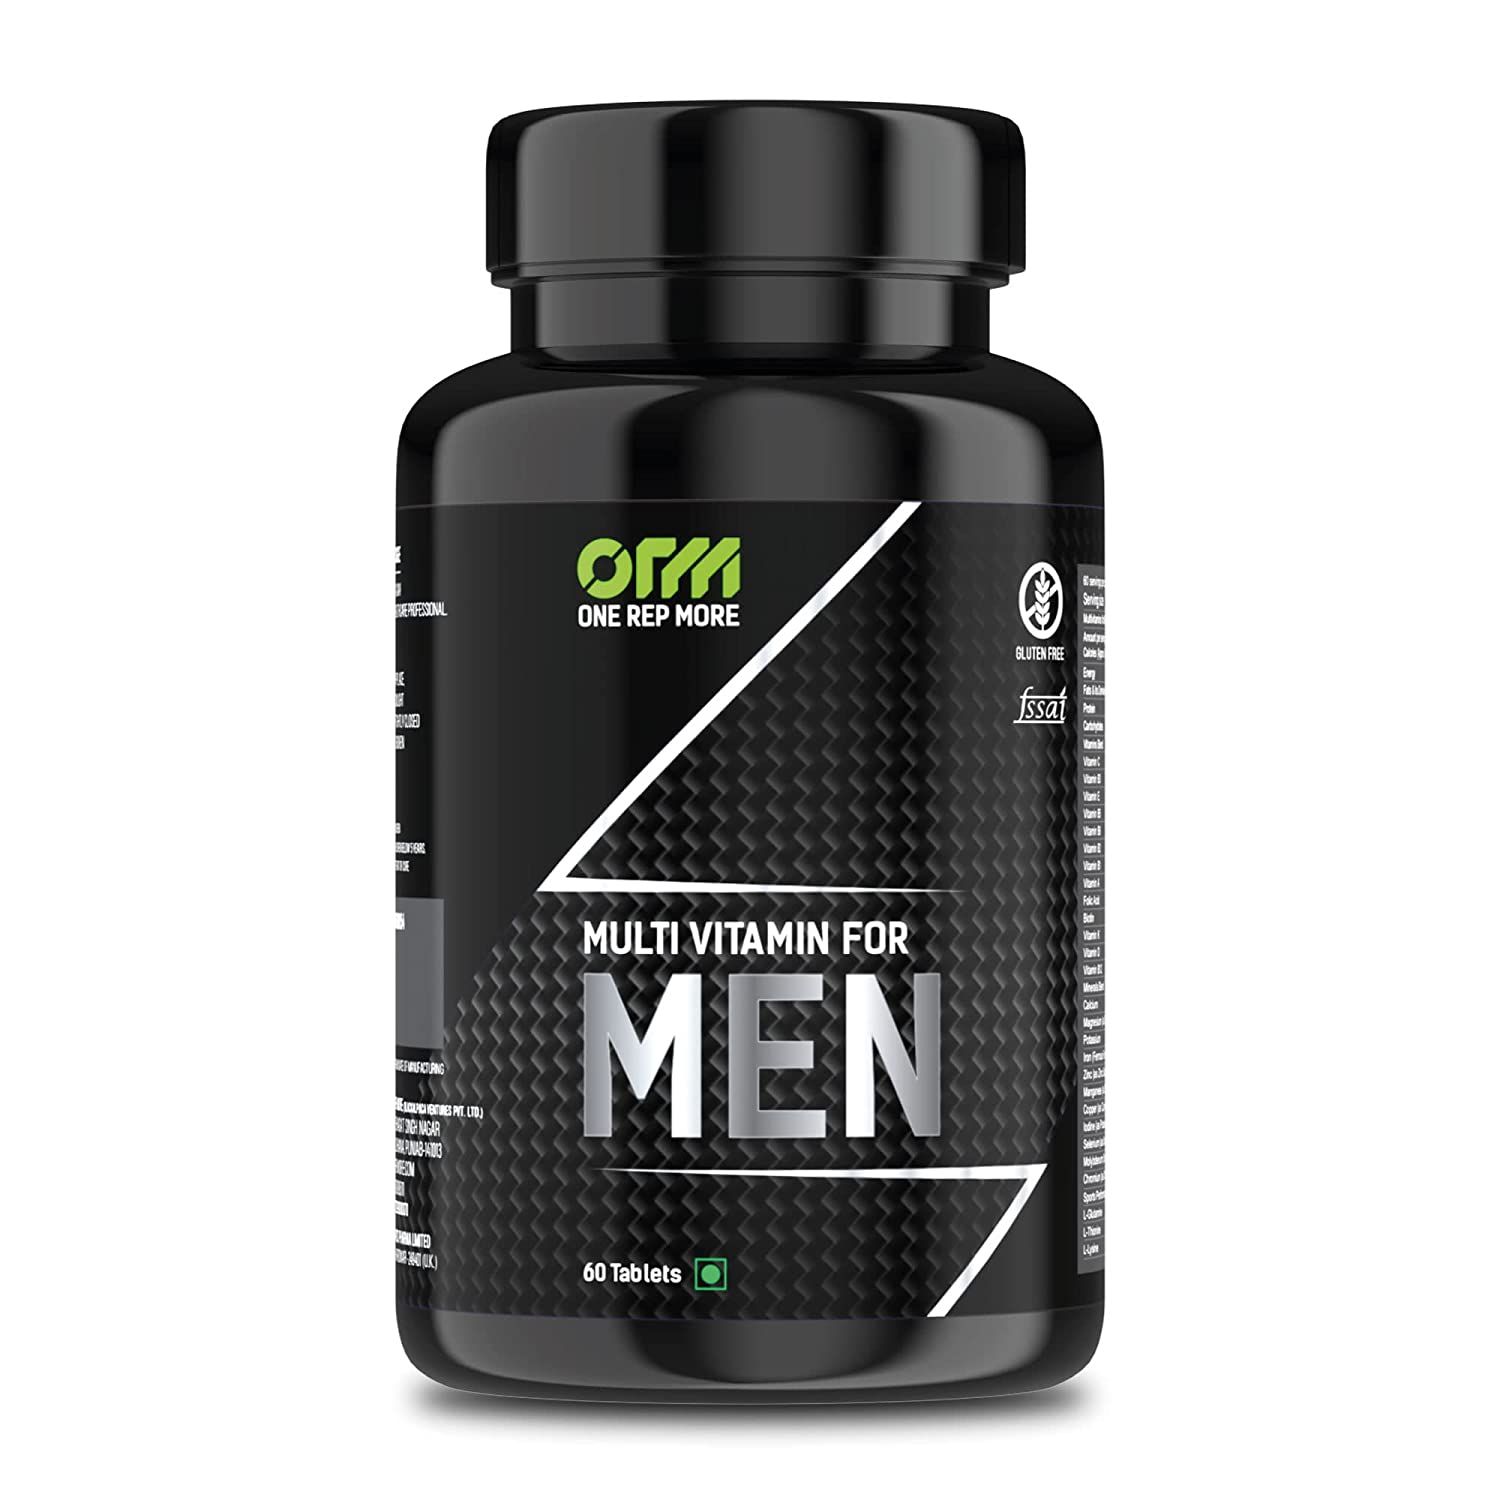 ONE REP MORE Multivitamin for Men chocolate flavoured tablets Image